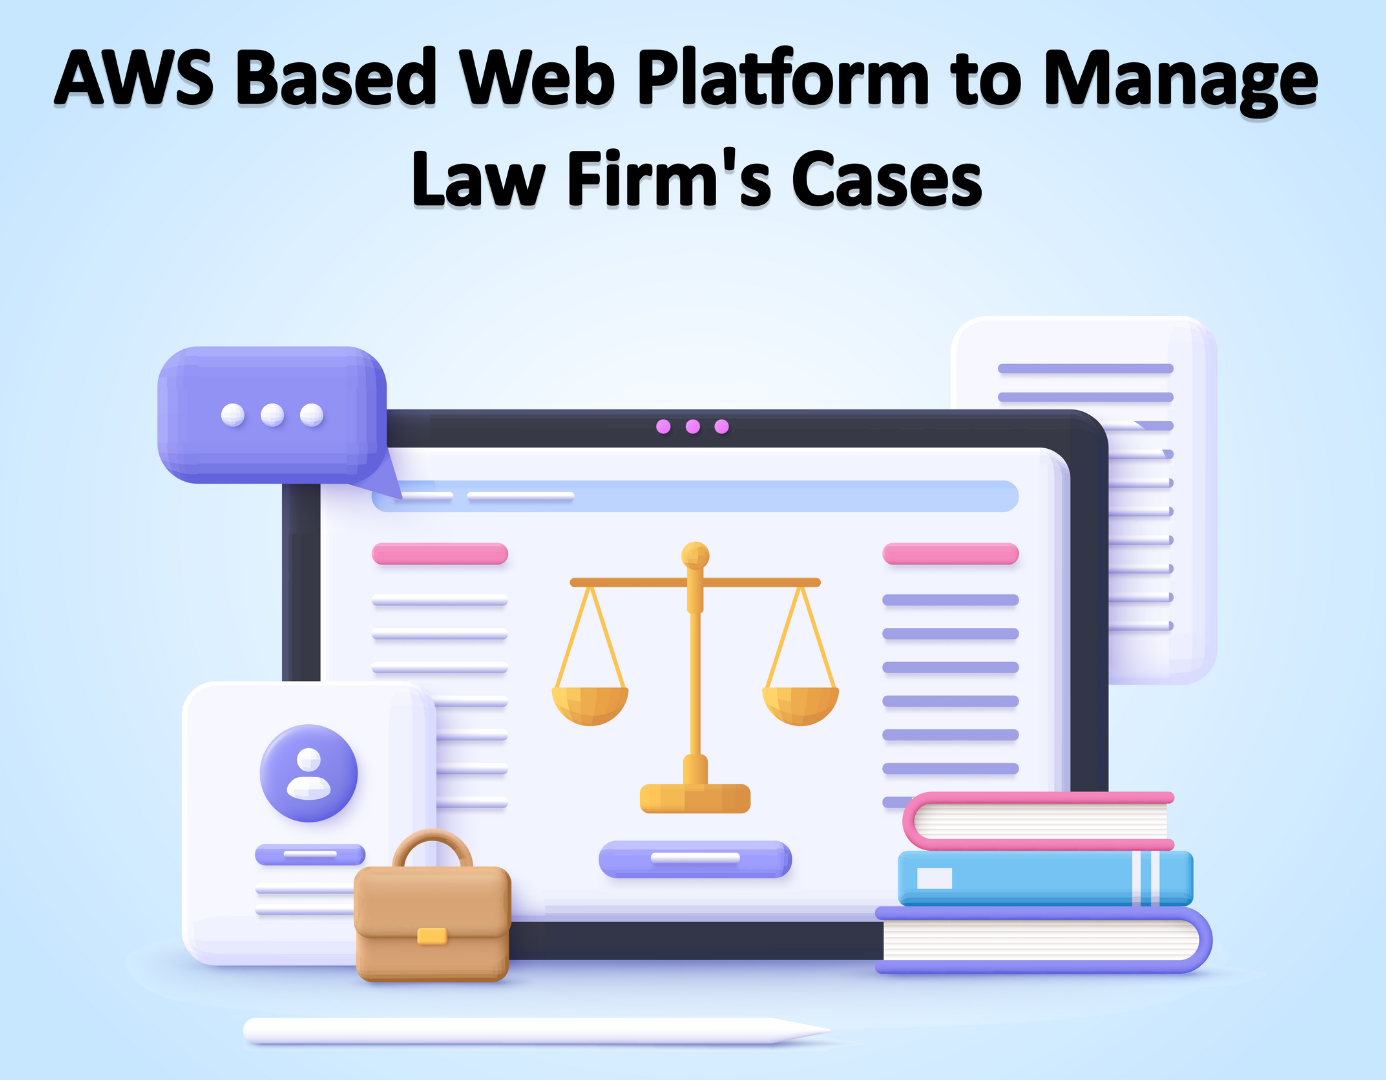 AWS-Based Law Firm Case Management: an Effective, Automated, and Secure Solution.